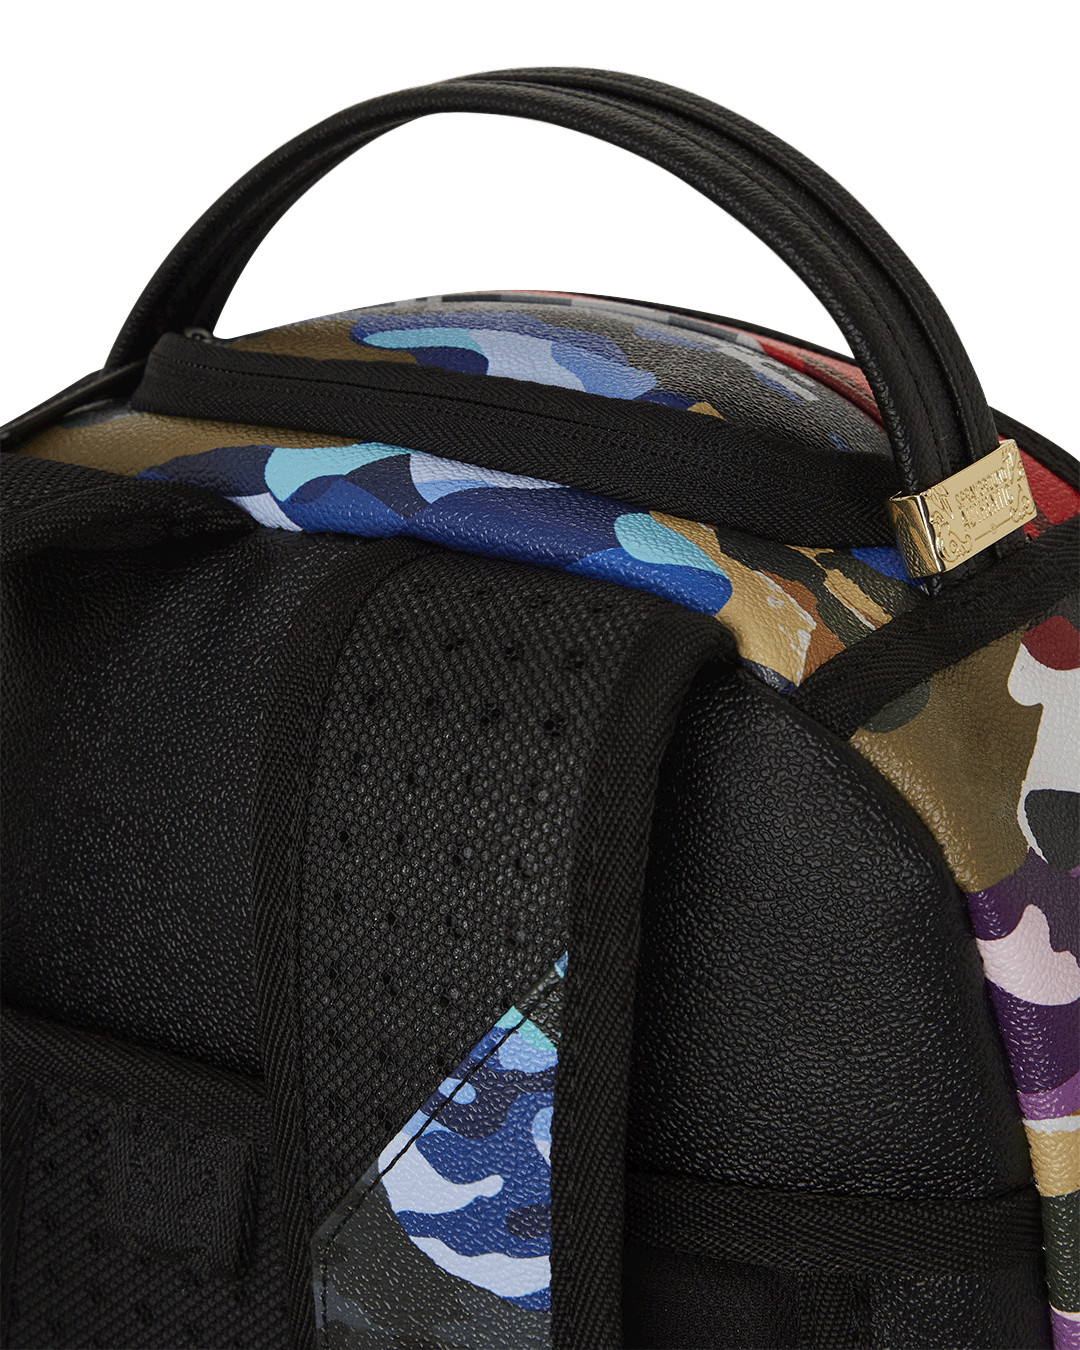 SLICED AND DICED CAMO BACKPACK